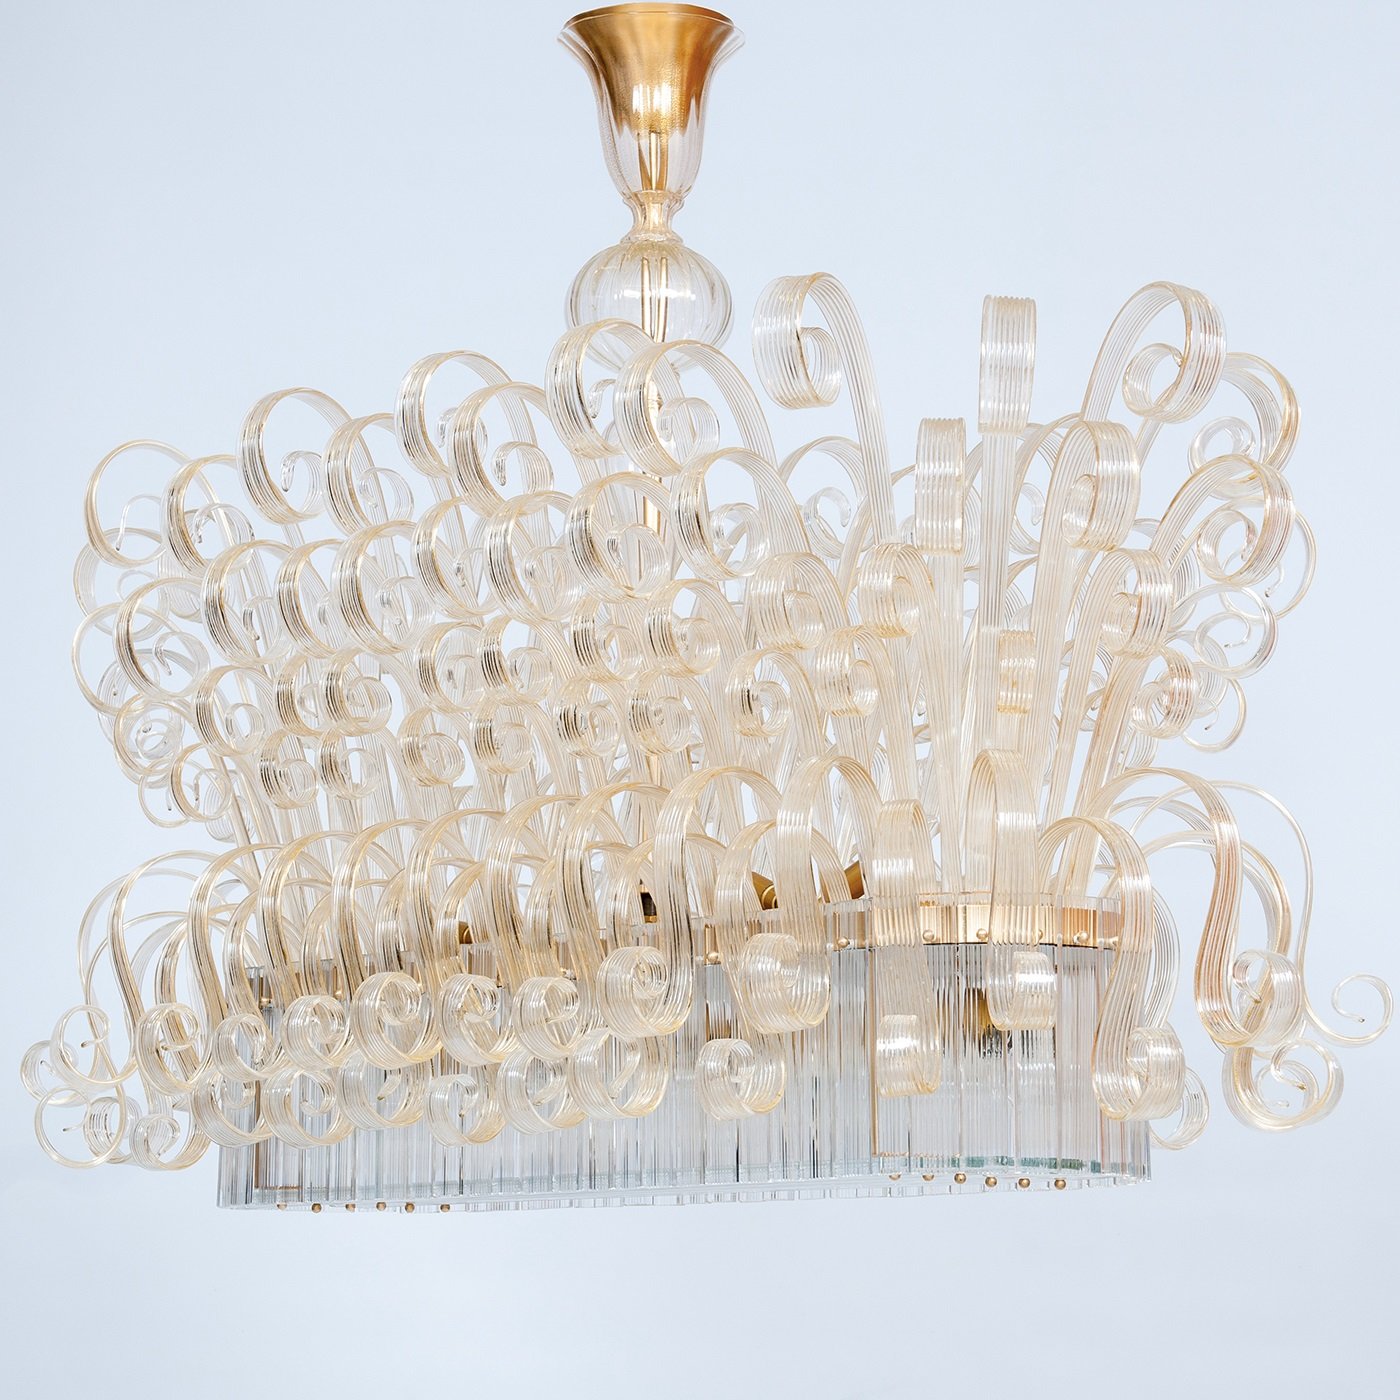 Limited Edition Italian Chandelier with 24K Gold - Alternative view 2